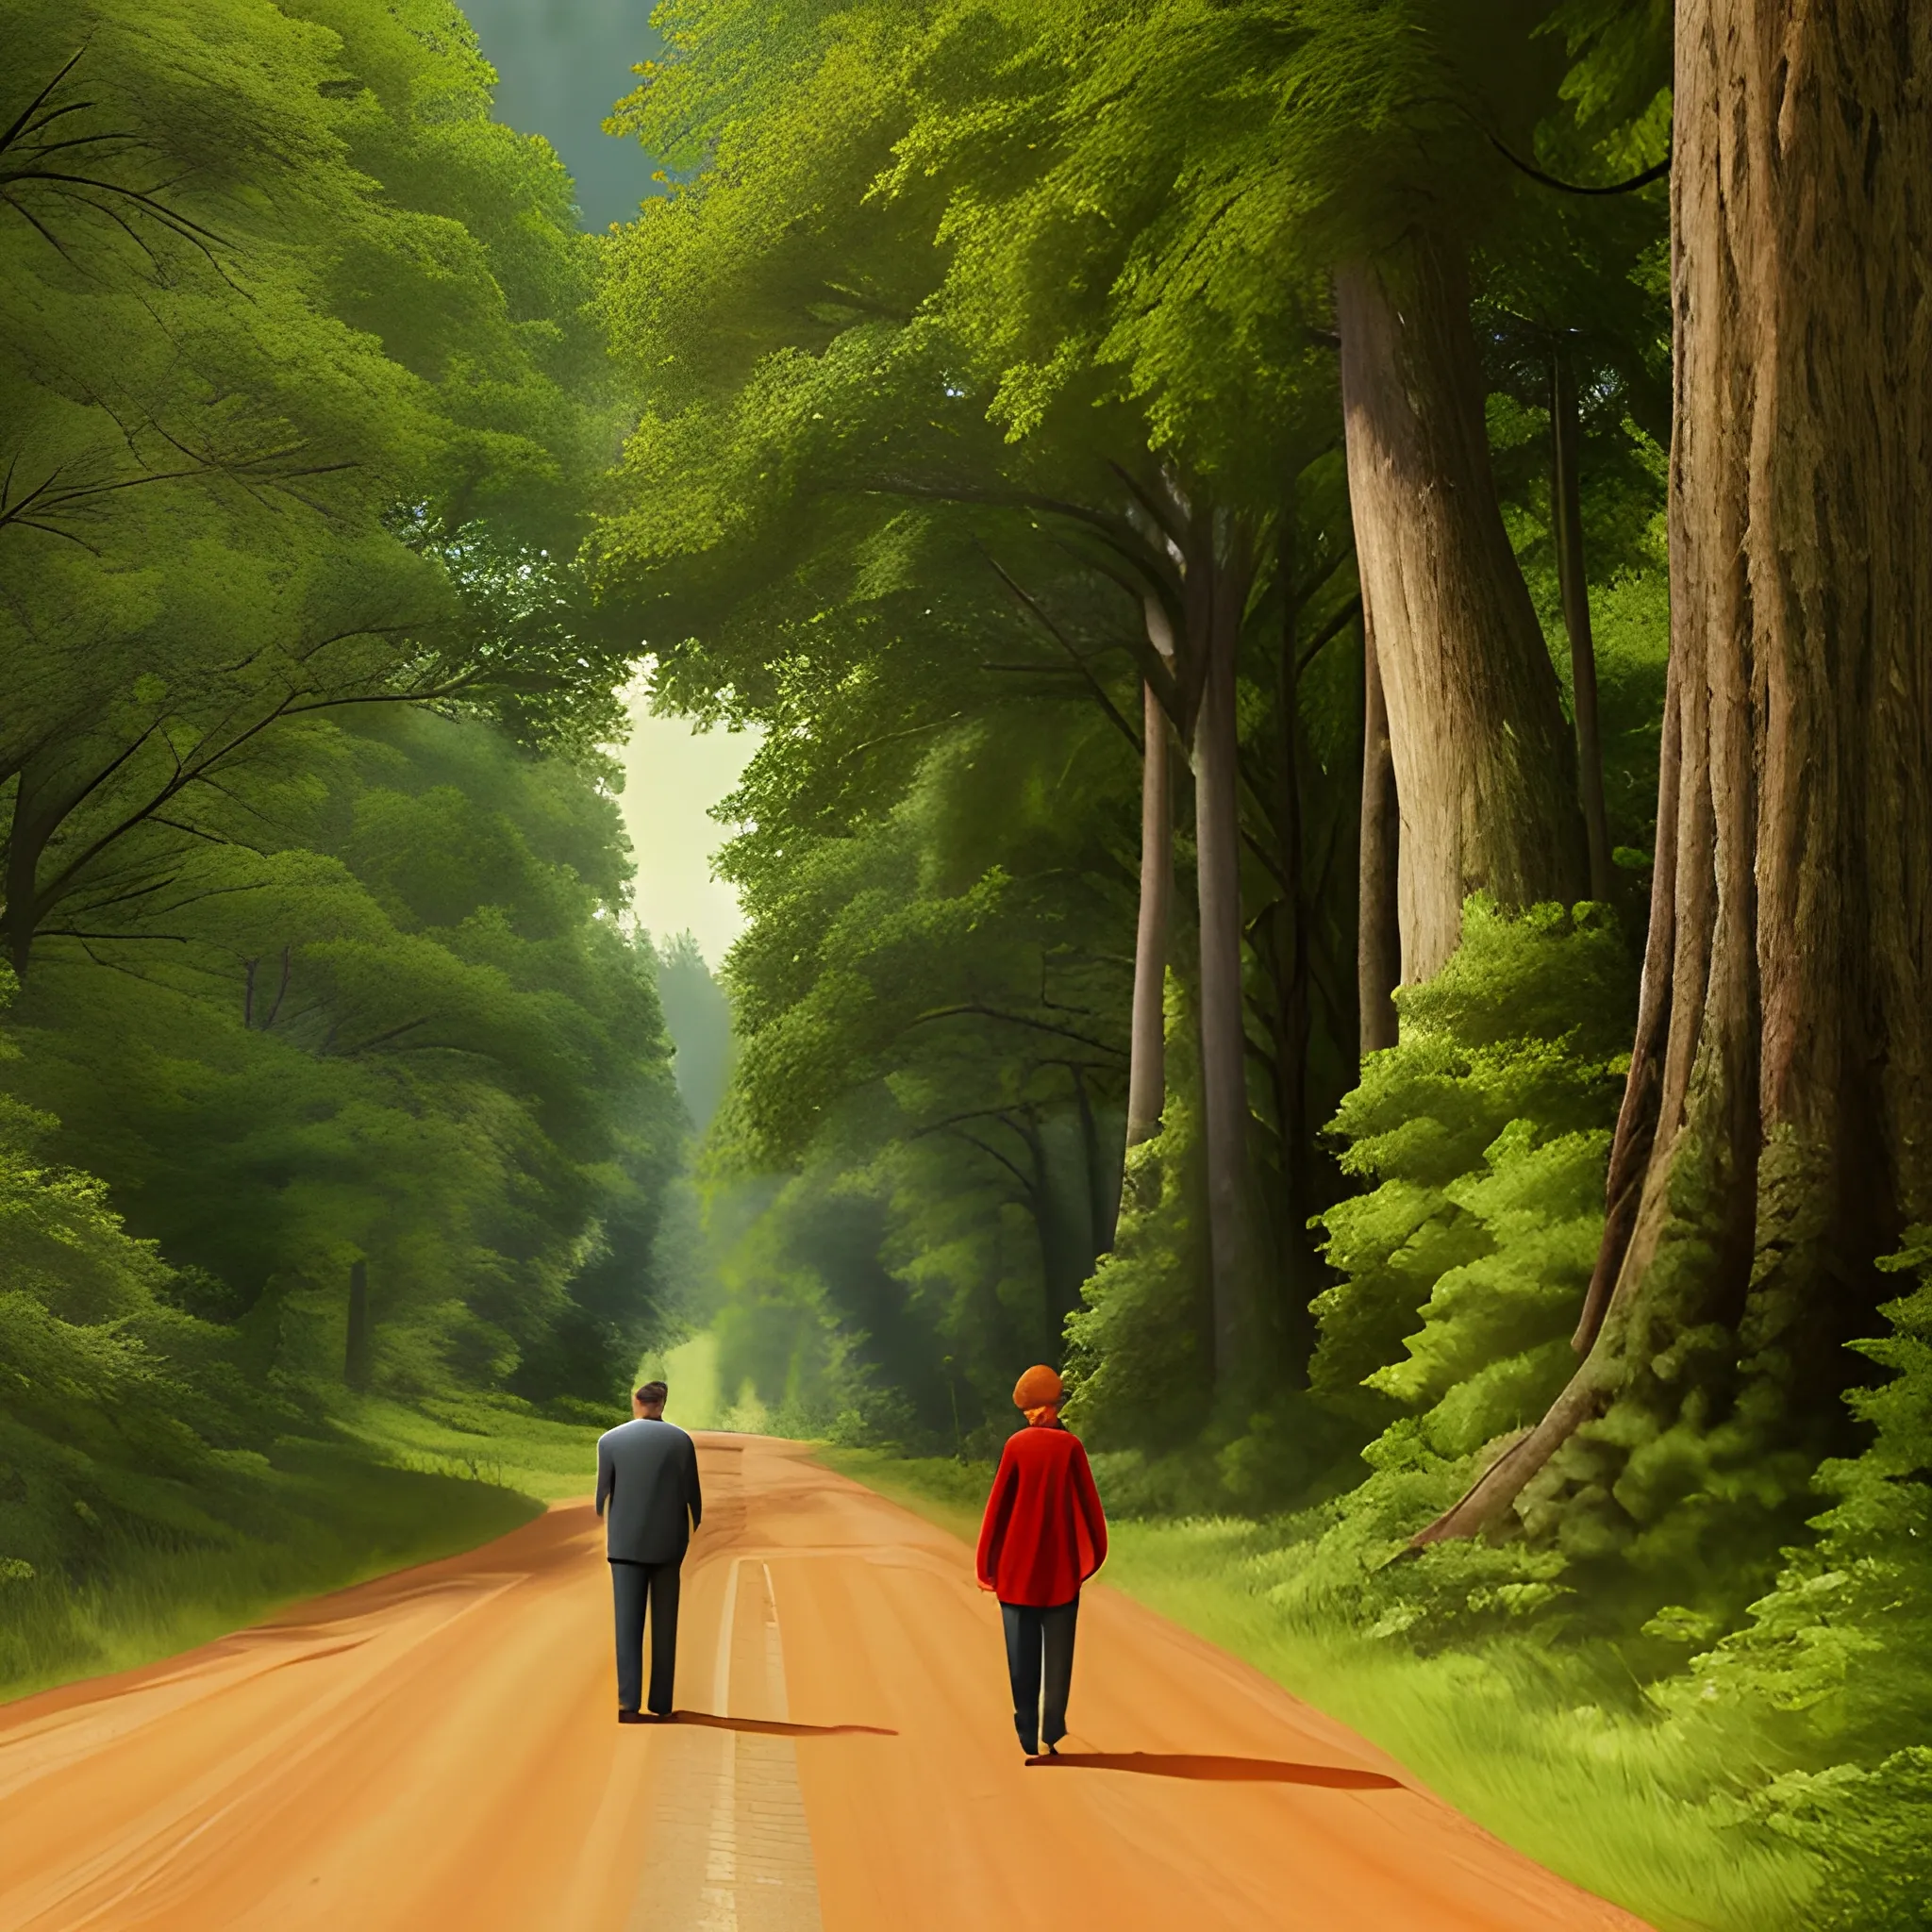 Landscape of a forest with large cedar trees. The leaves are lush green. There is a dirt road going down the middle with trees on either side. There are two figures walking down the road, backs facing the camera. One figure is a man with red hair and simple garb, the other is a woman with long brown hair and a plain dress. High quality. Realistic.